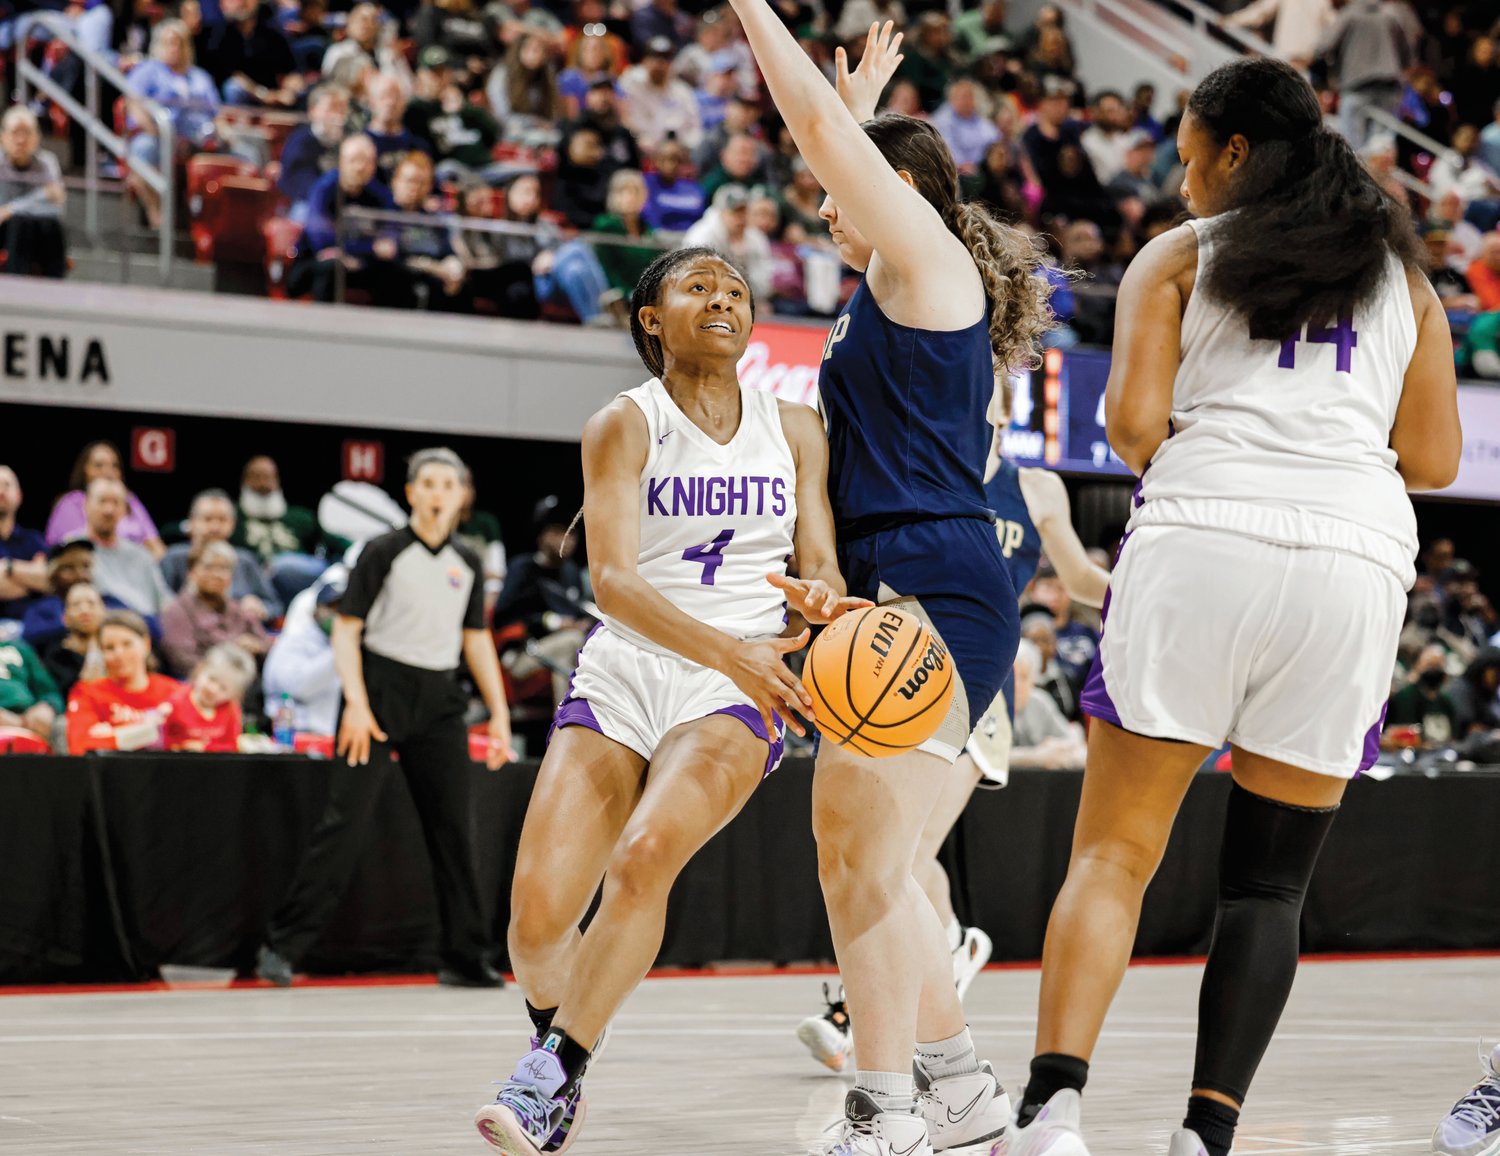 Chatham Charter senior Tamaya Walden (4) had 11 points Saturday against Bishop McGuinness in the 1A girls state final.